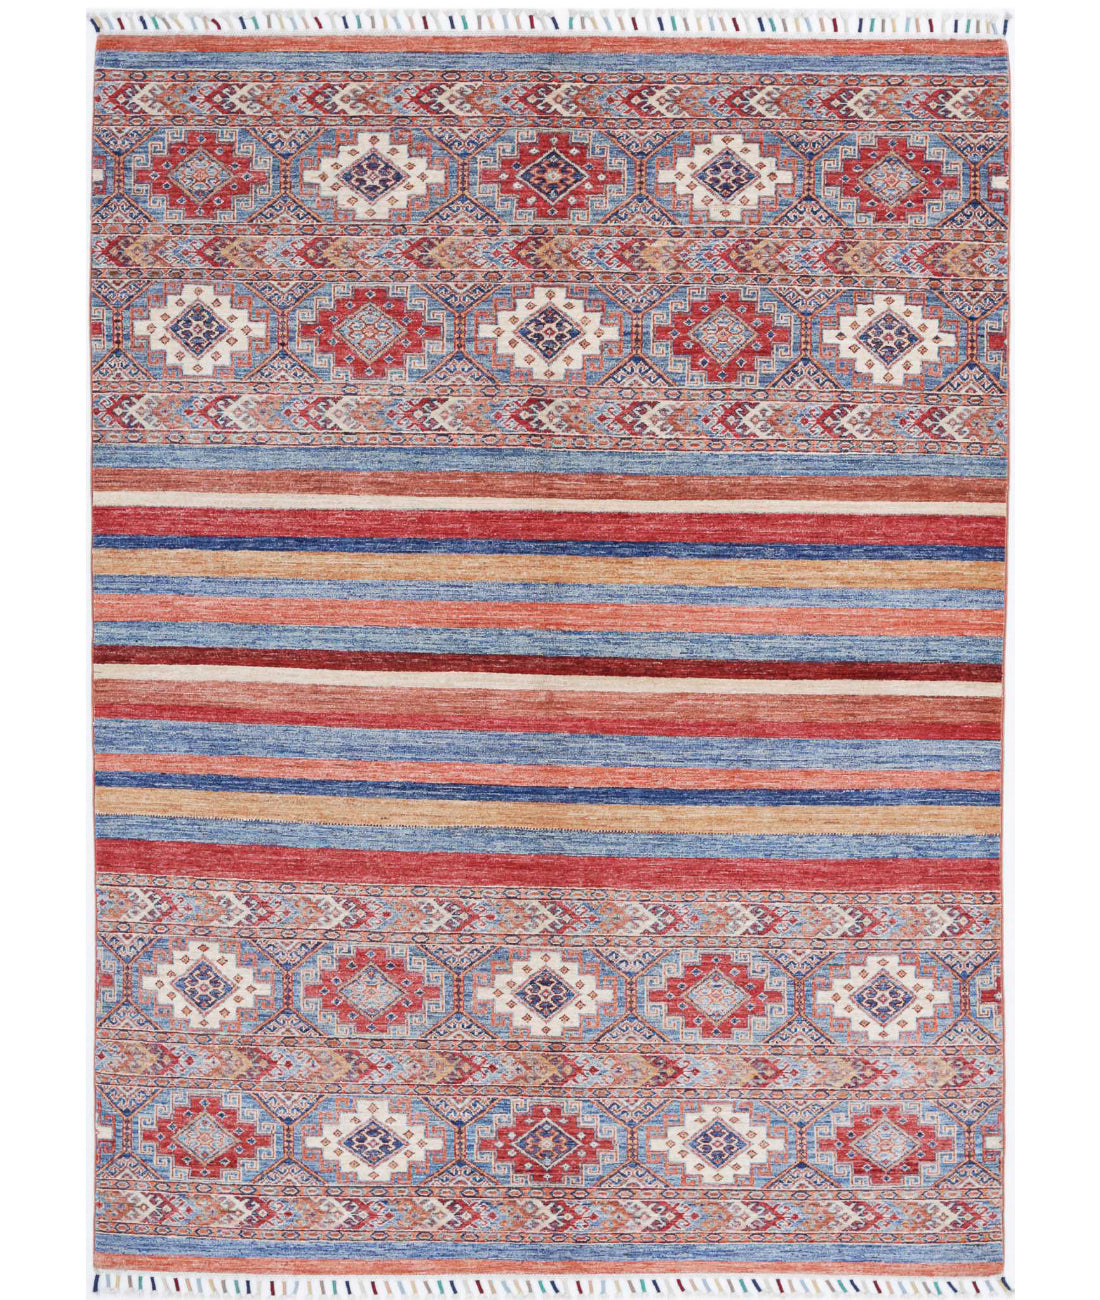 Hand Knotted Khurjeen Wool Rug - 5'6'' x 7'7'' 5'6'' x 7'7'' (165 X 228) / Multi / Red